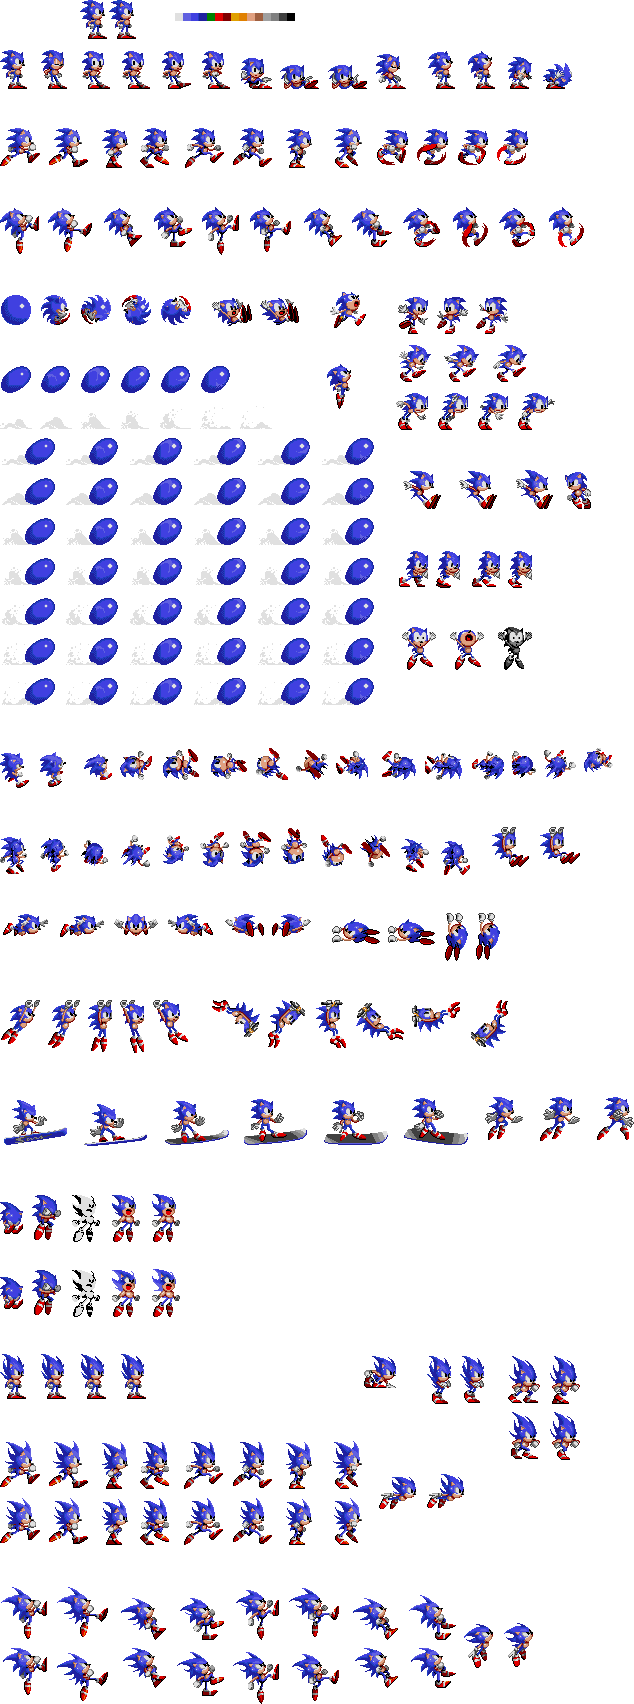 S3P Sonic Sprite Sheet with S2 Shading by Abbysek on DeviantArt